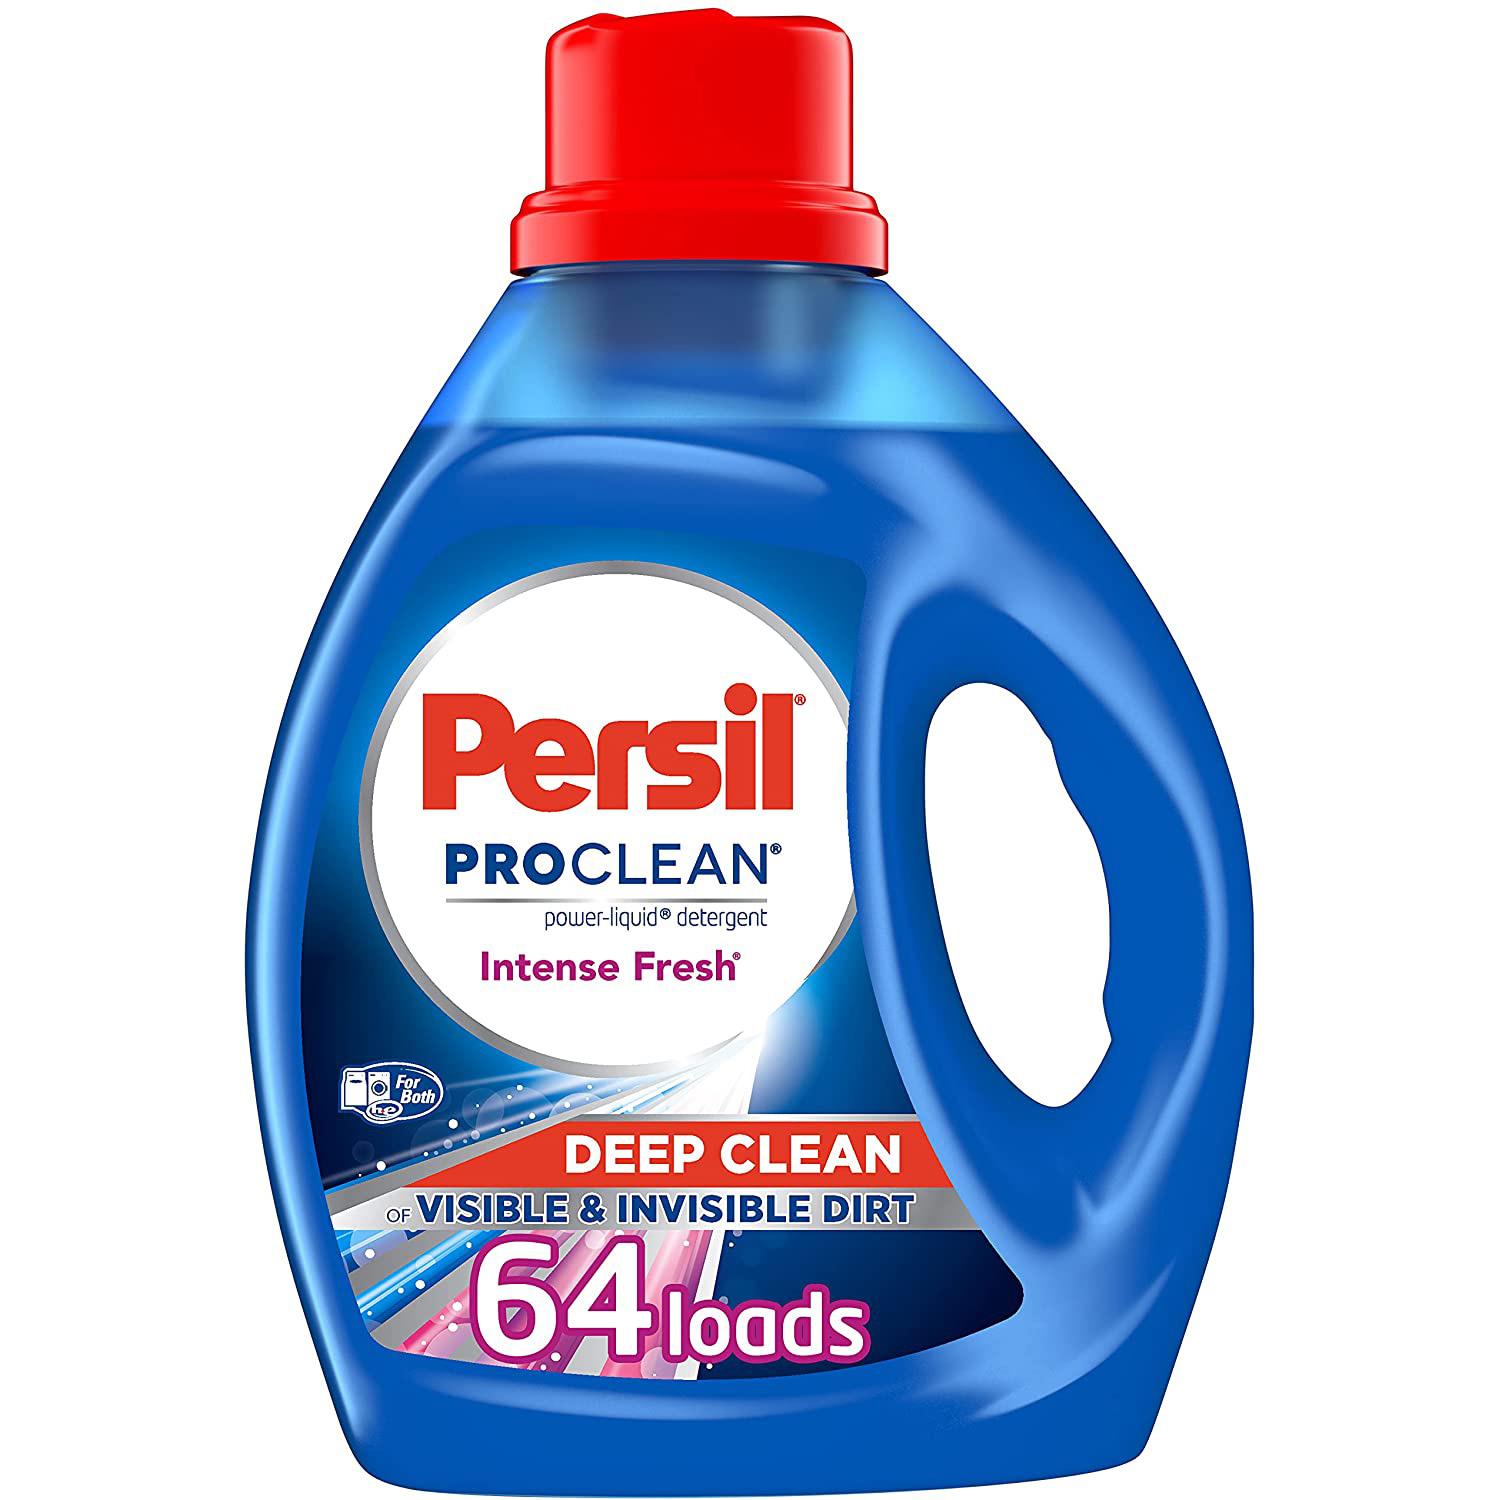 Persil ProClean Liquid Laundry Detergent for $8.89 Shipped